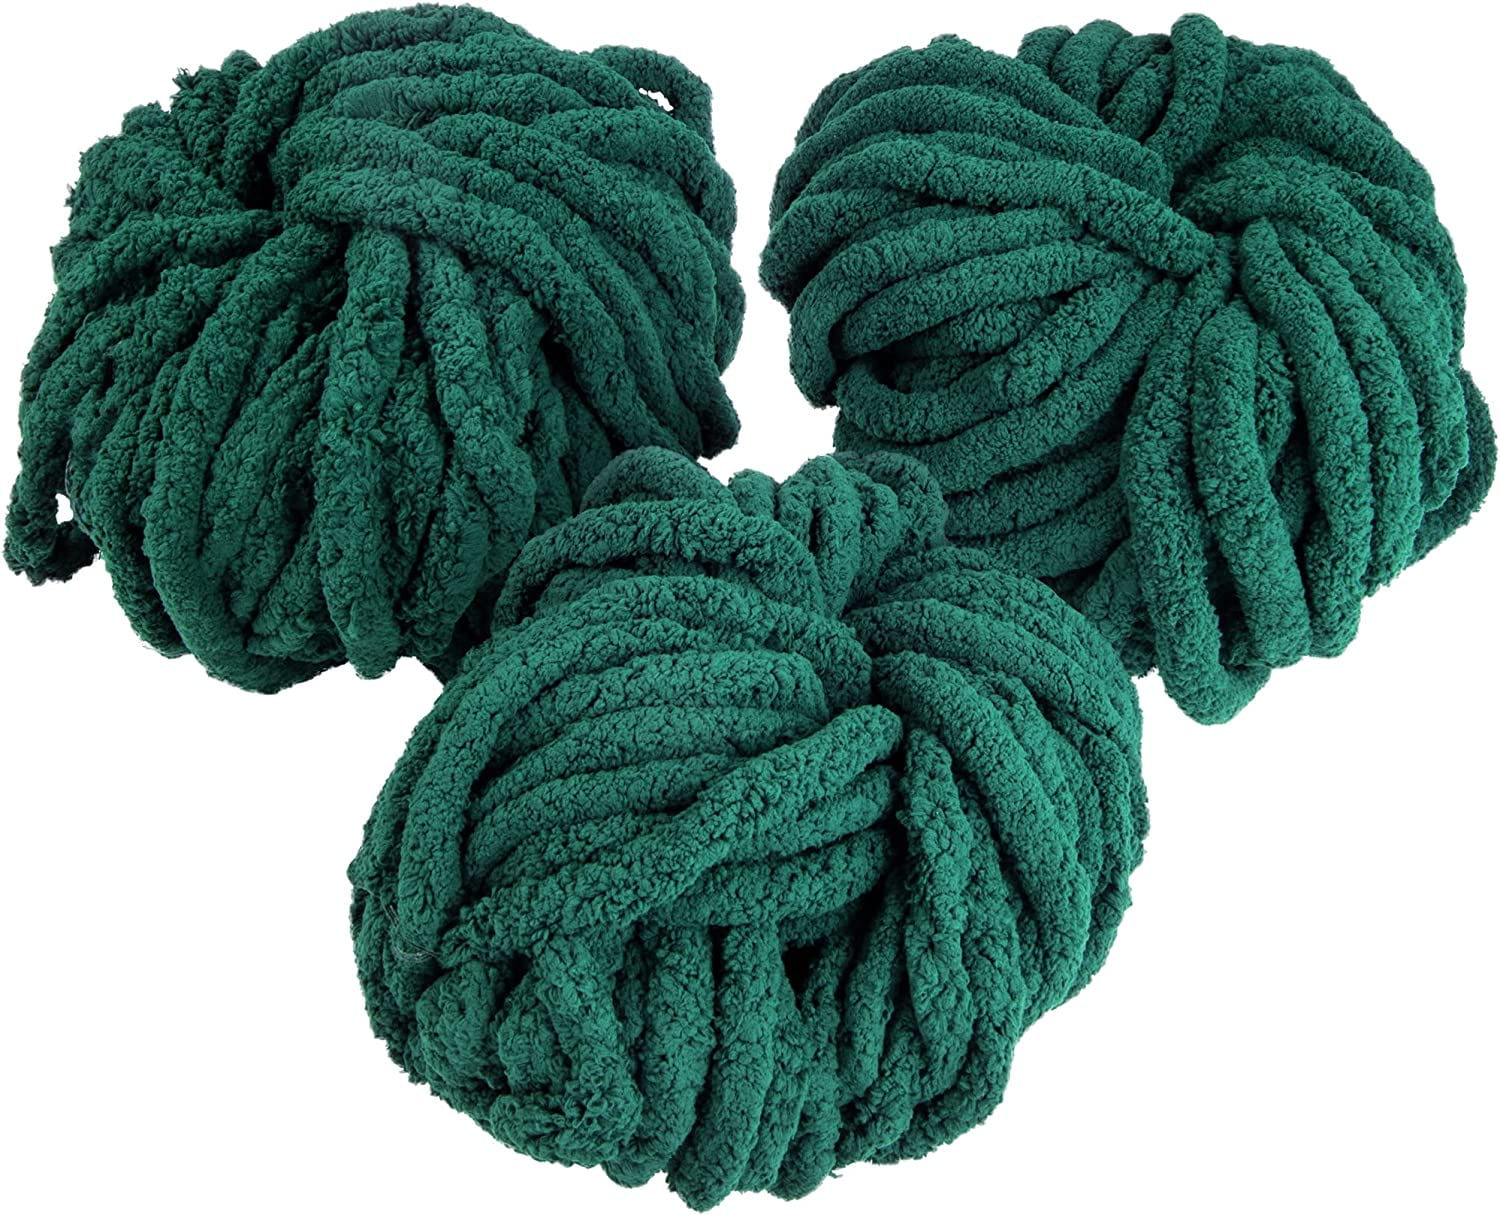 3 Pack Beginners Crochet Yarn, Jade Green Yarn for Crocheting Knitting  Beginners, Easy-to-See Stitches, Chunky Thick Bulky Cotton Soft Yarn for